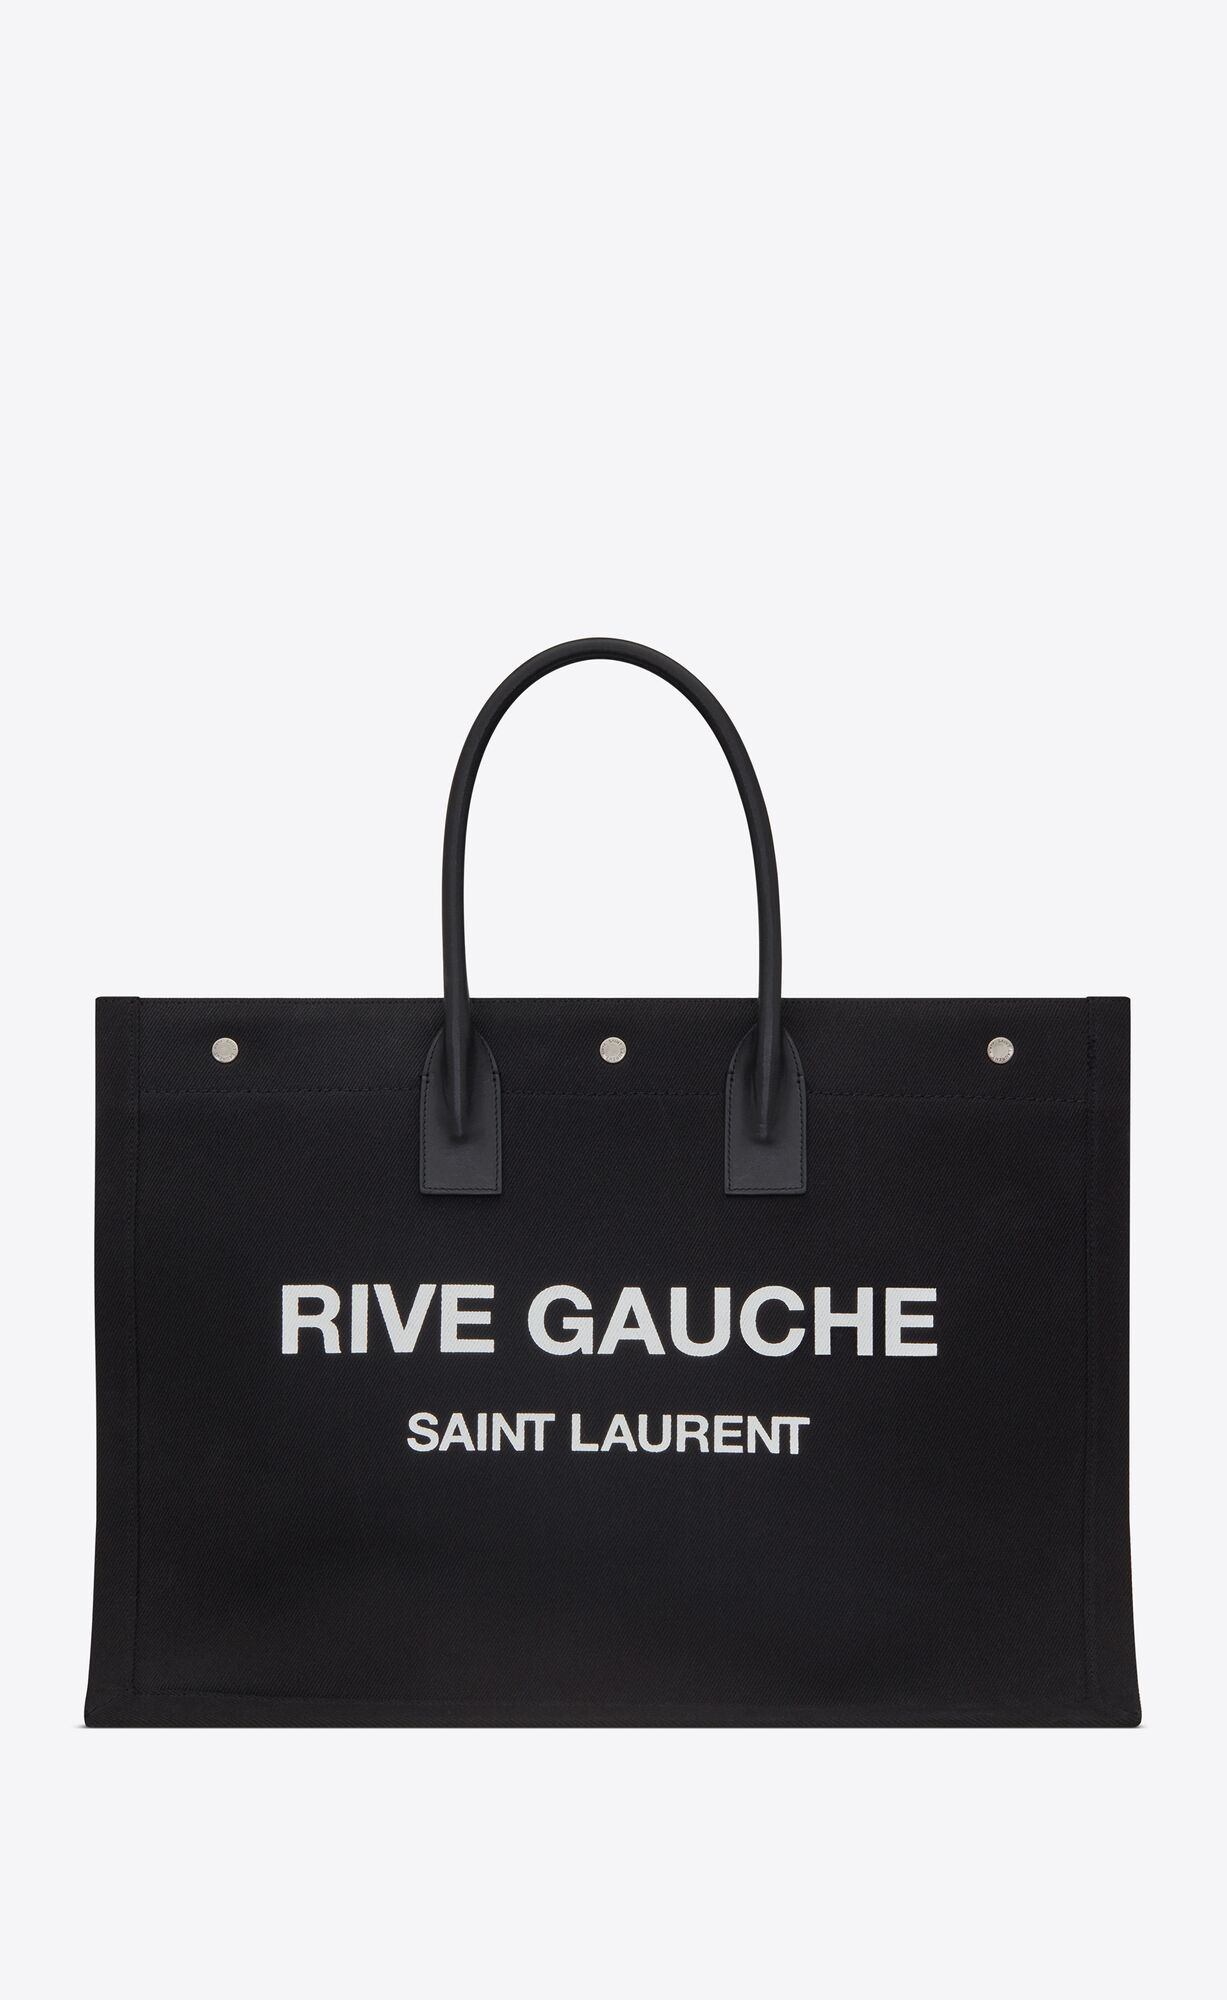 rive gauche tote bag in linen and leather | Saint Laurent Inc. (Global)